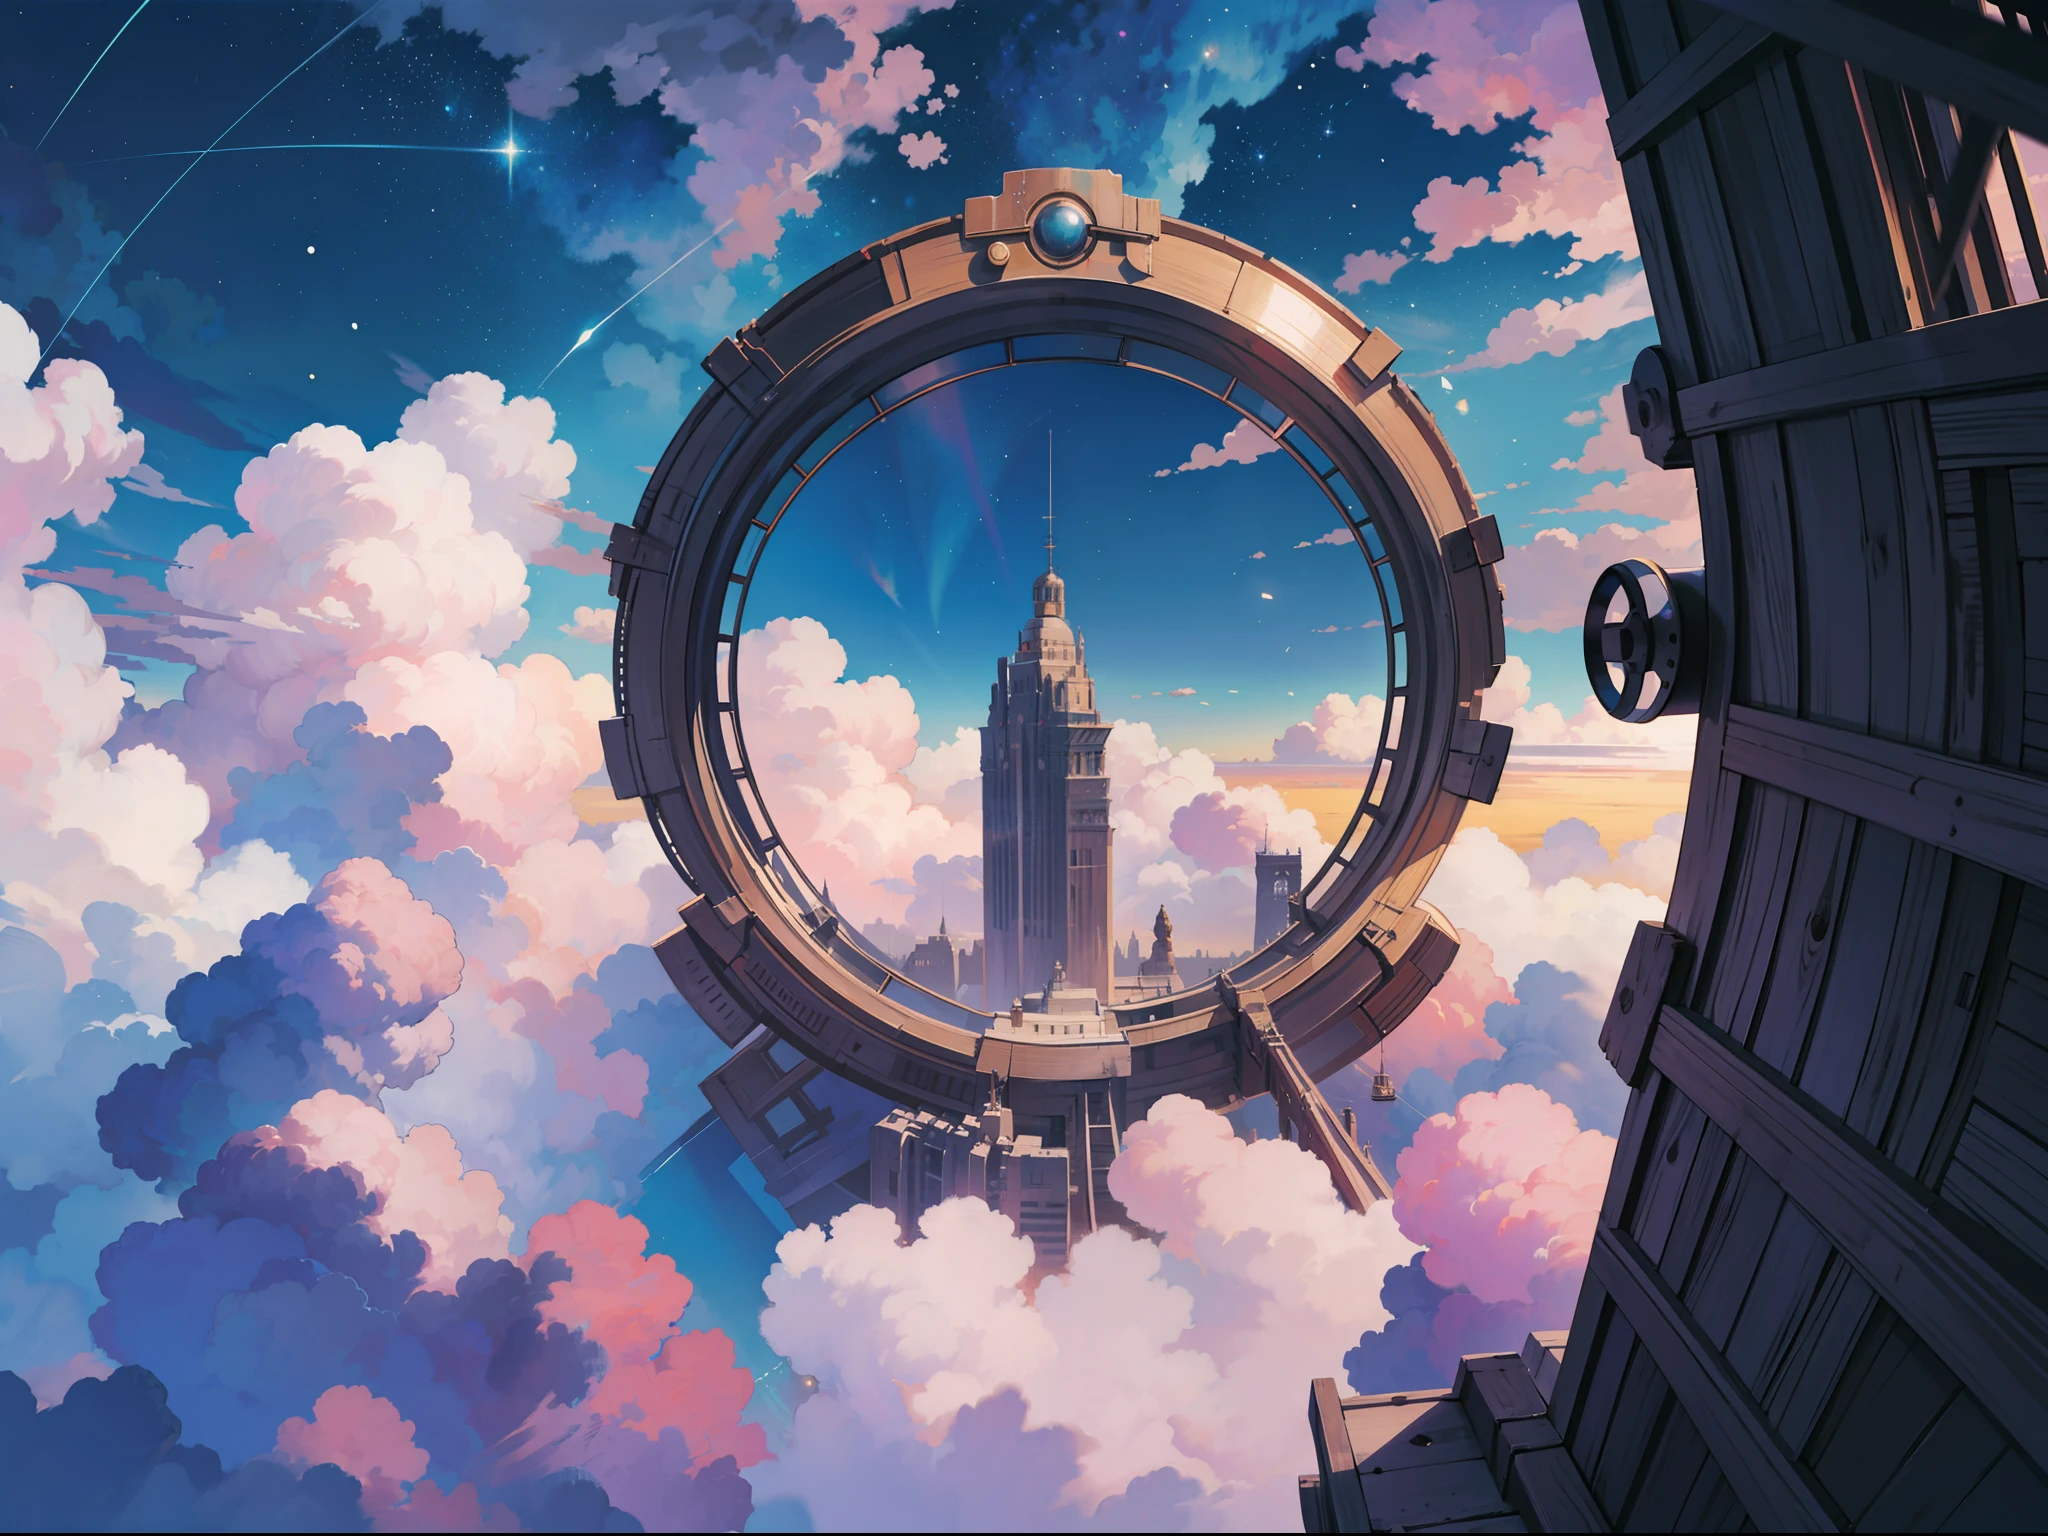 （levitating：1.5），（A huge double-ring steampunk city floating in space：1.3），（Illuminate the futuristic steampunk city：1.4），（Thick clouds：1.4），（Estilo de Makoto Shinkai：1.4），Rejoice，Perfect quality，Clear focus（Clutter - home：0.8）， （tmasterpiece：1.2）， （realisticlying：1.2） ，（with light glowing：1.2）， （best qualtiy）， （detailed  starry sky：1.3） ，（complexdetails）， （8K）， （Detail meteor） ，（Sharp focus），（having fun），（Award-winning digital artwork：1.3） af （sketching：1.3），（with dynamism：1.3）,studiolight,Theme，looking from above, the space, afloat， --v 6